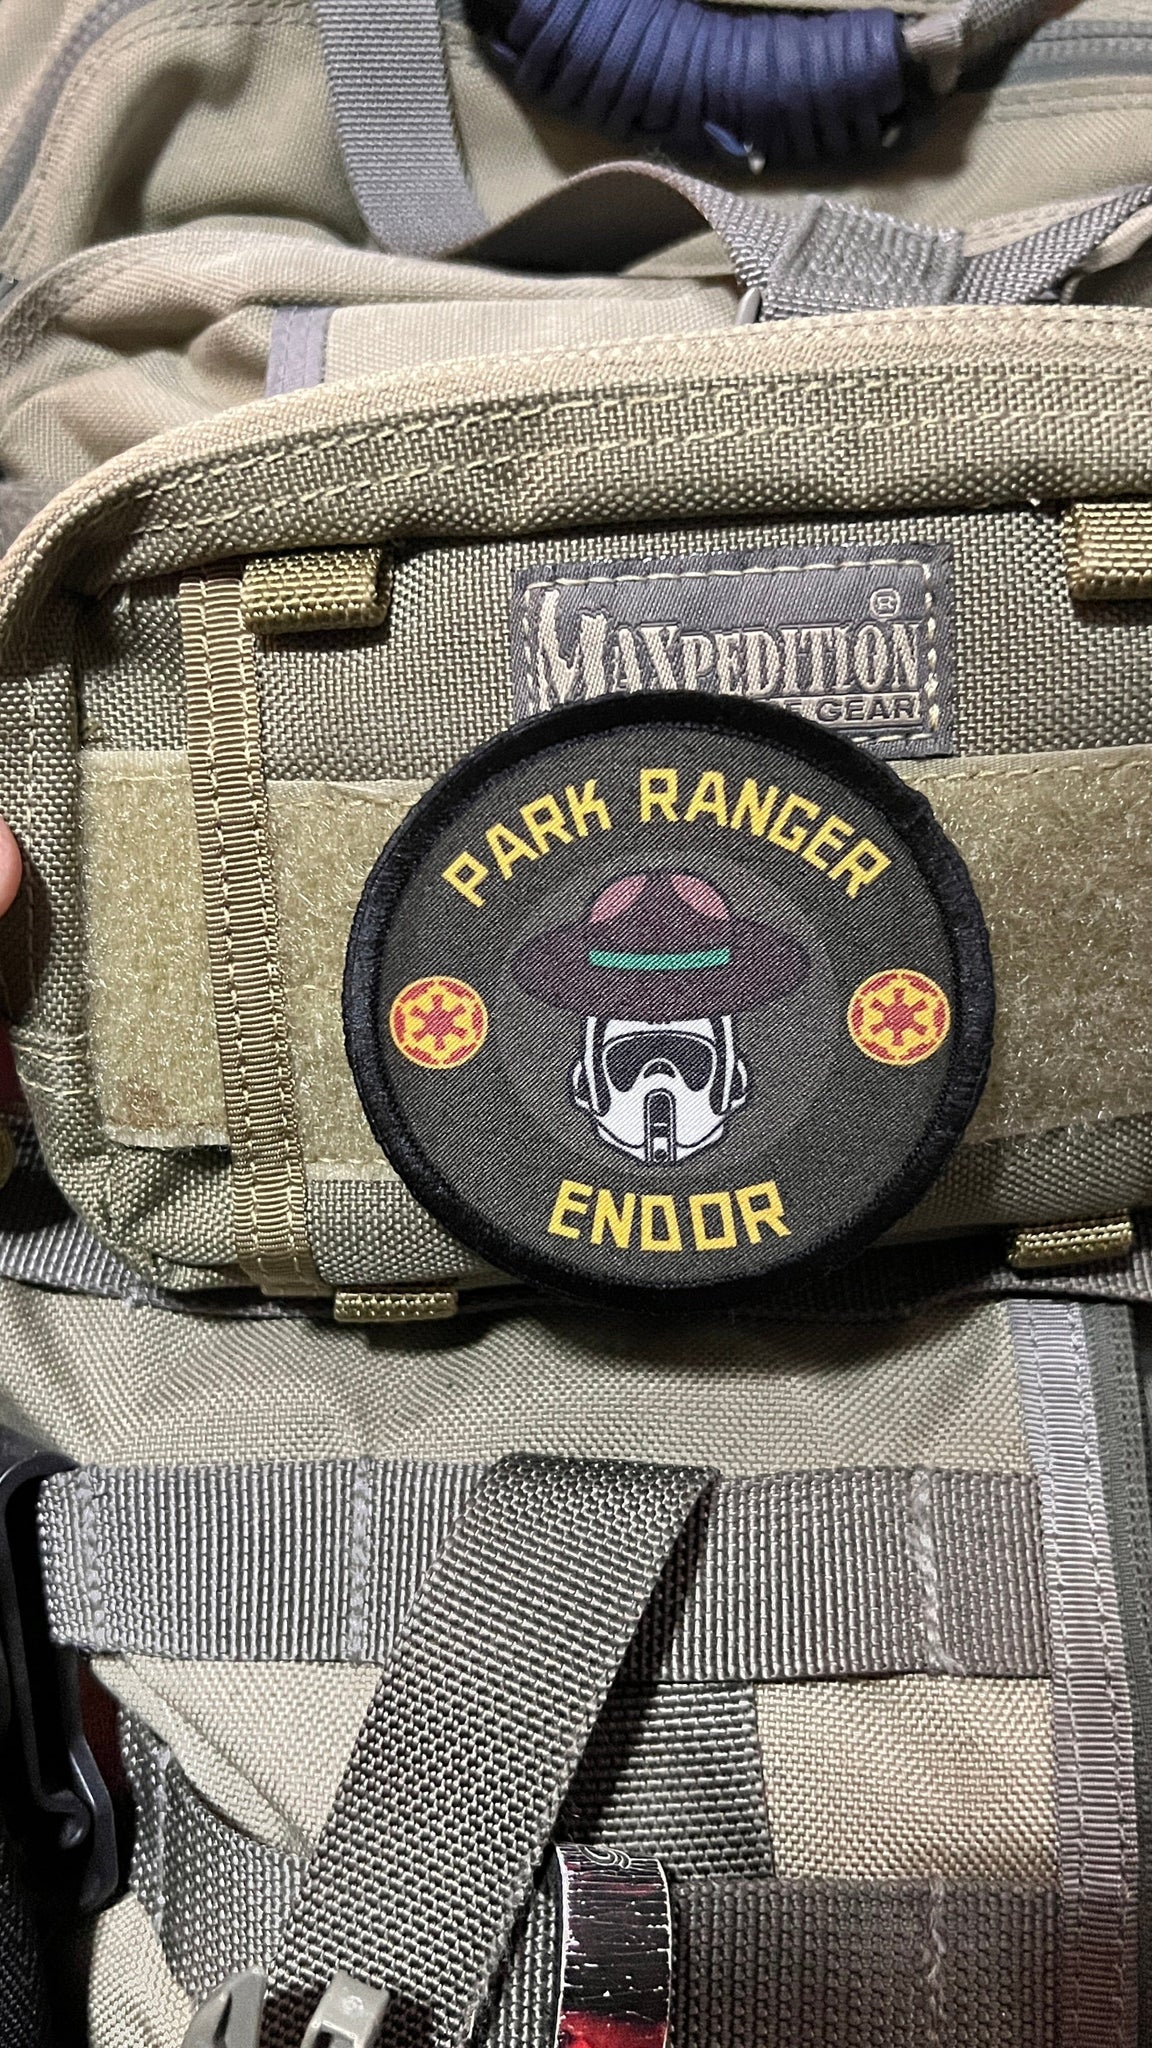 Park Ranger Endor Funny Morale Patch Tactical Military USA